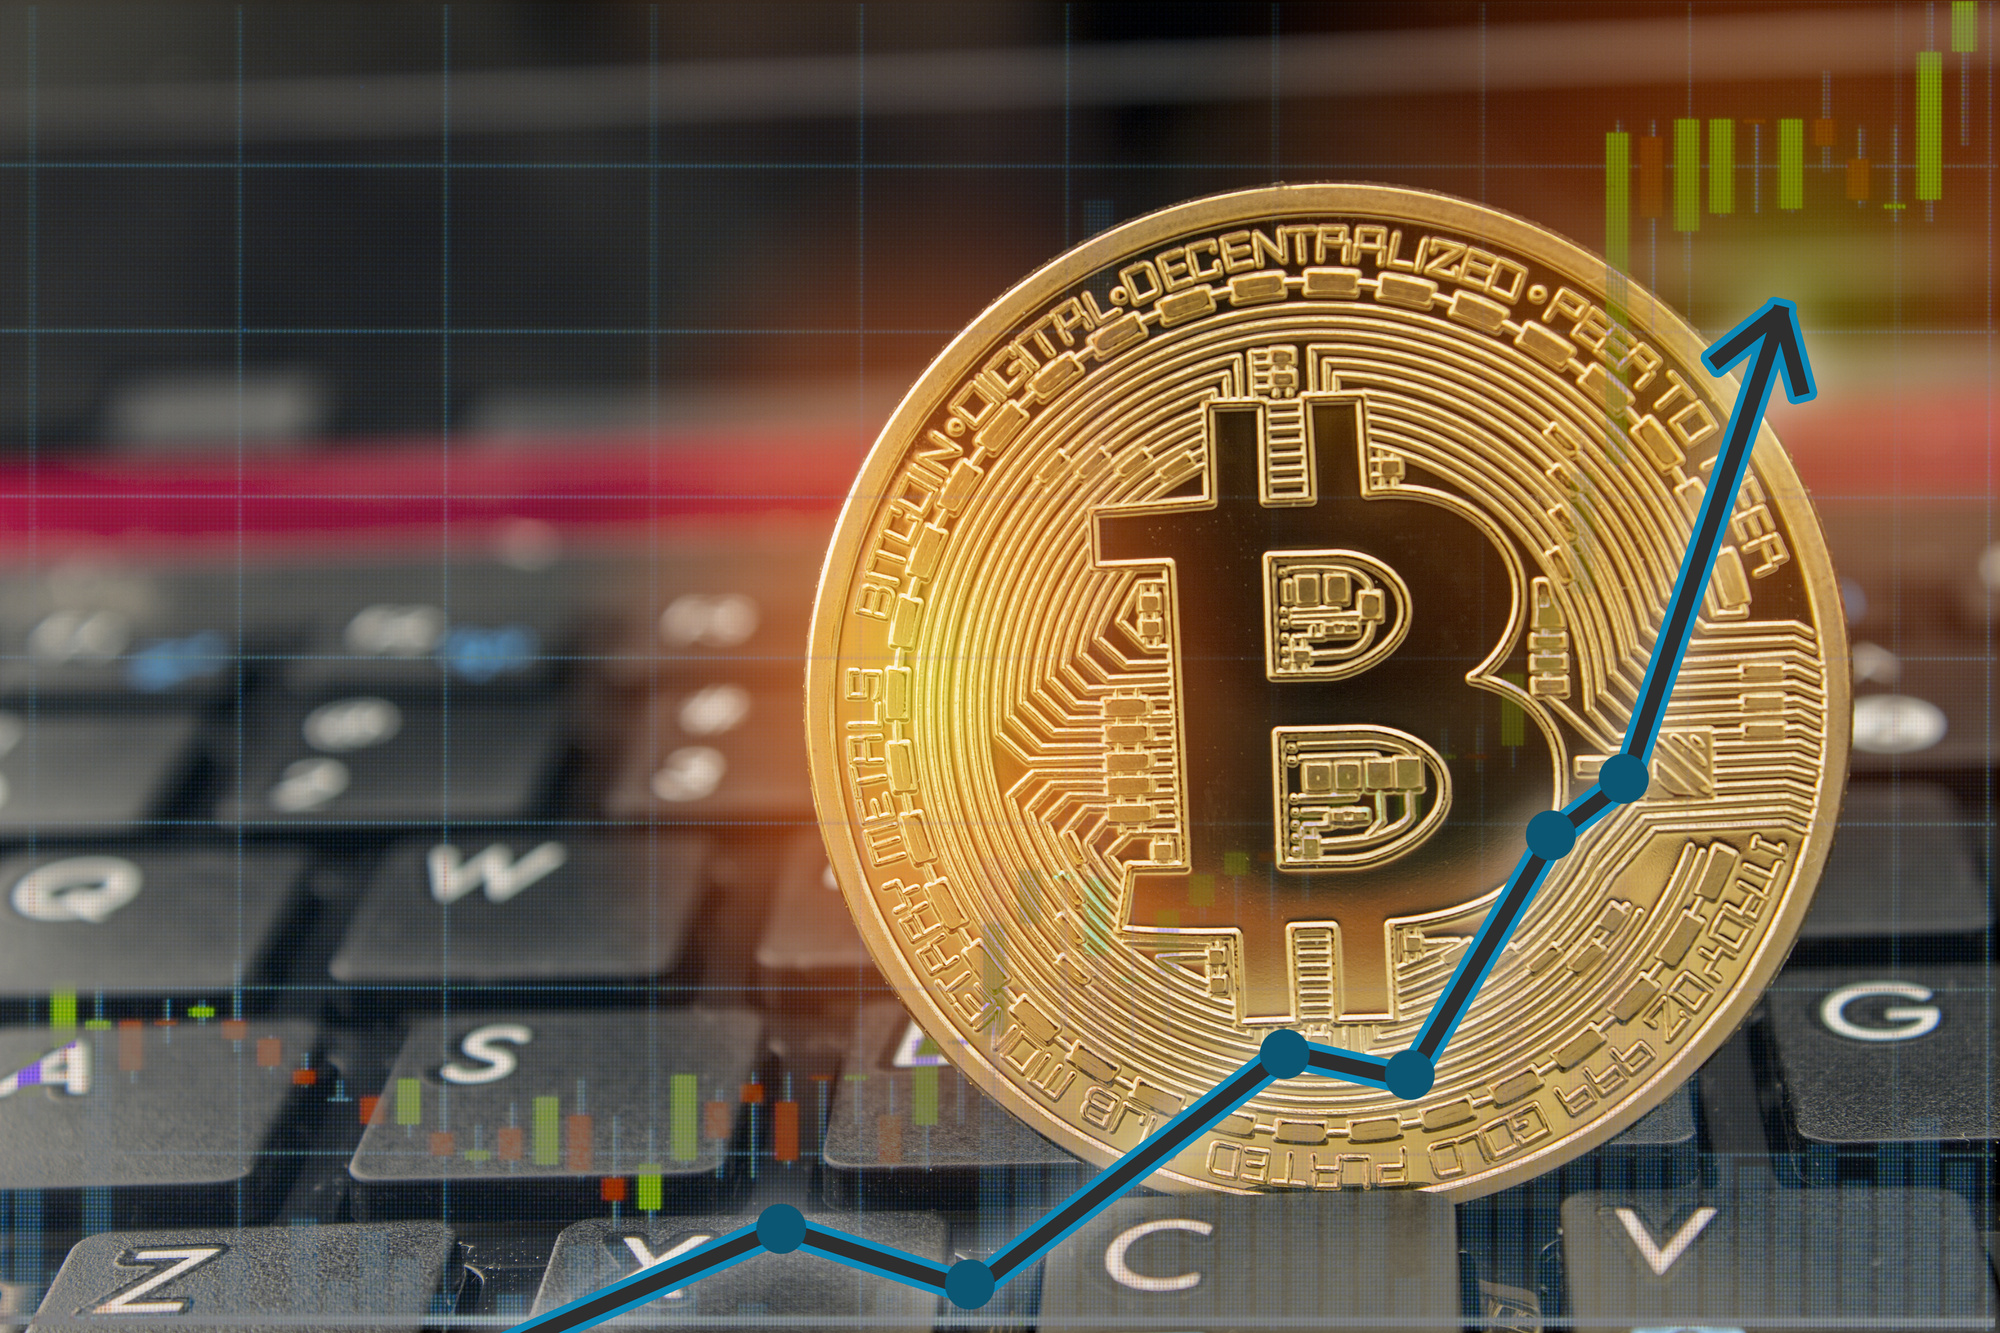 Trading Cryptocurrency: Here’s What You Need to Know